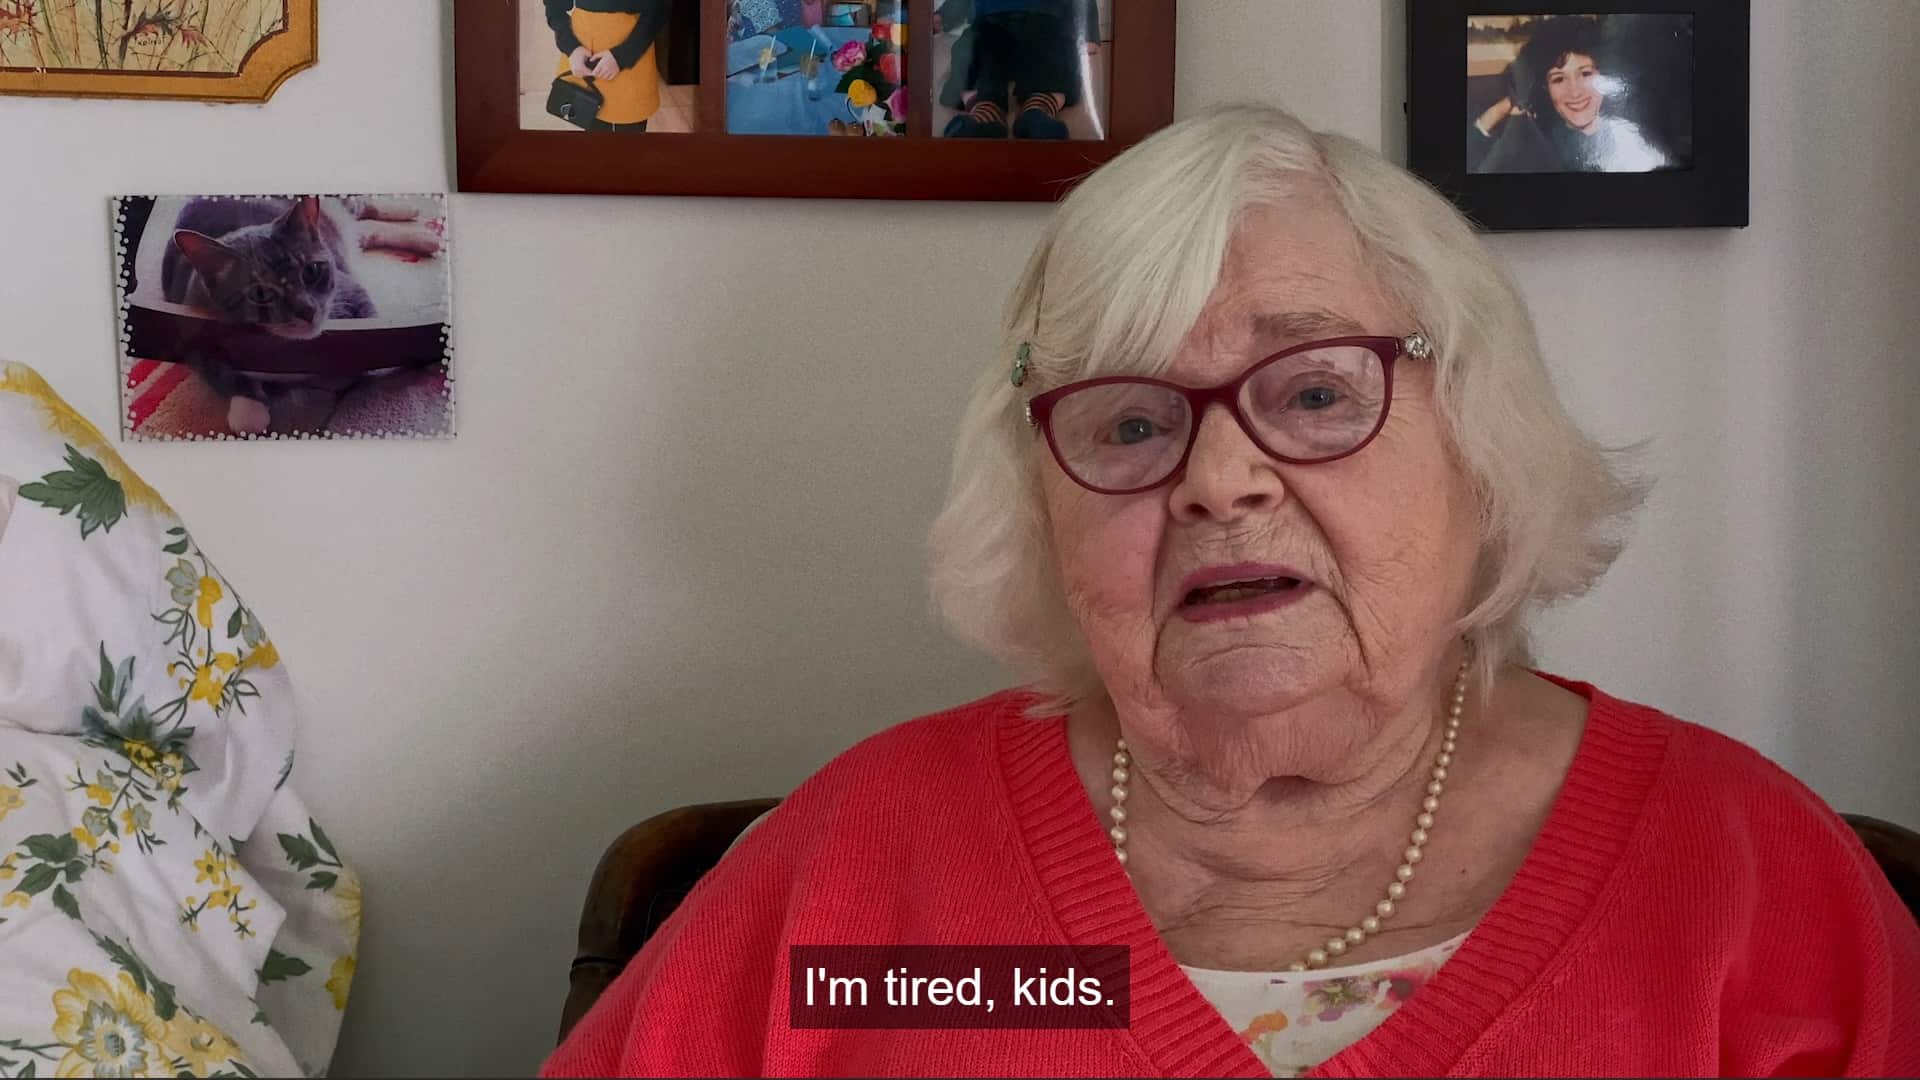 Mabel (June Squibb) noting she is tired